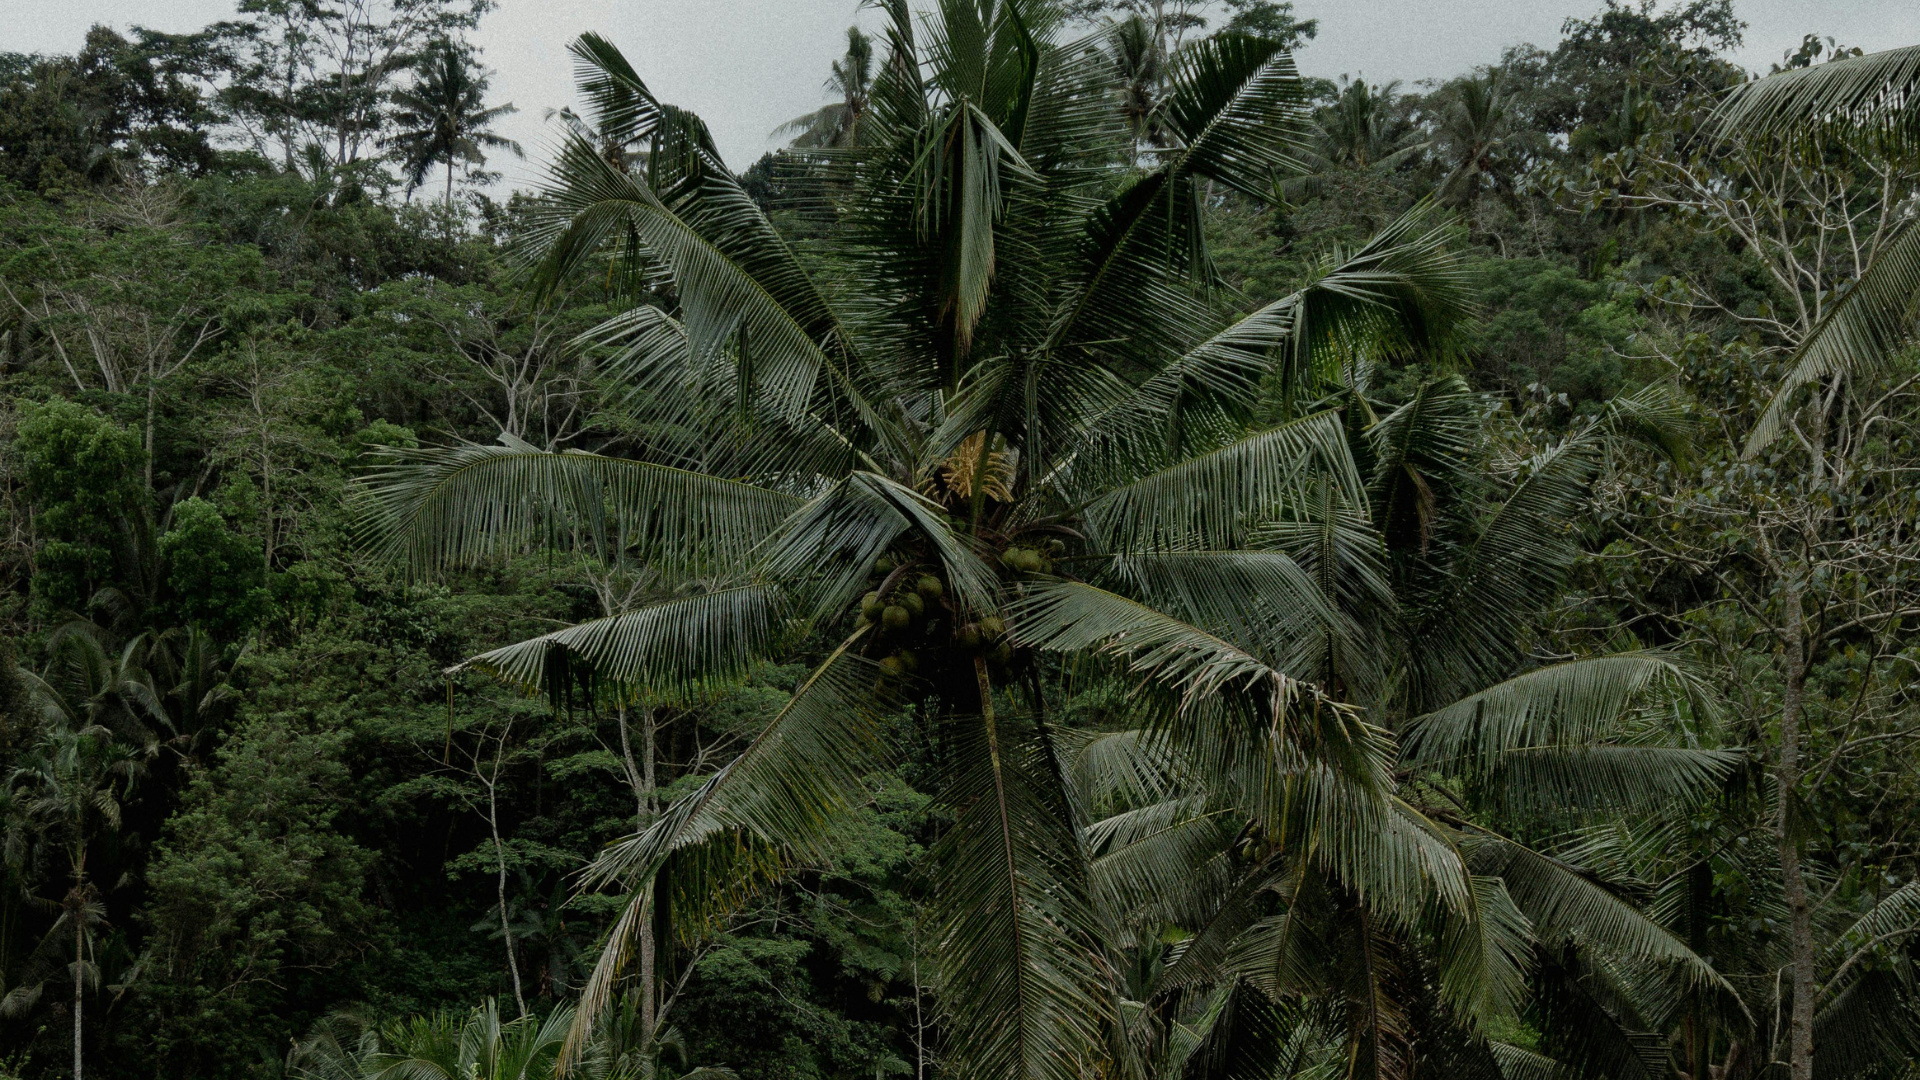 A tall coconut palm tree with ripe coconuts clustered near its top stands amidst dense, lush green foliage in a rainforest setting. The overcast sky adds a muted tone to the verdant landscape.